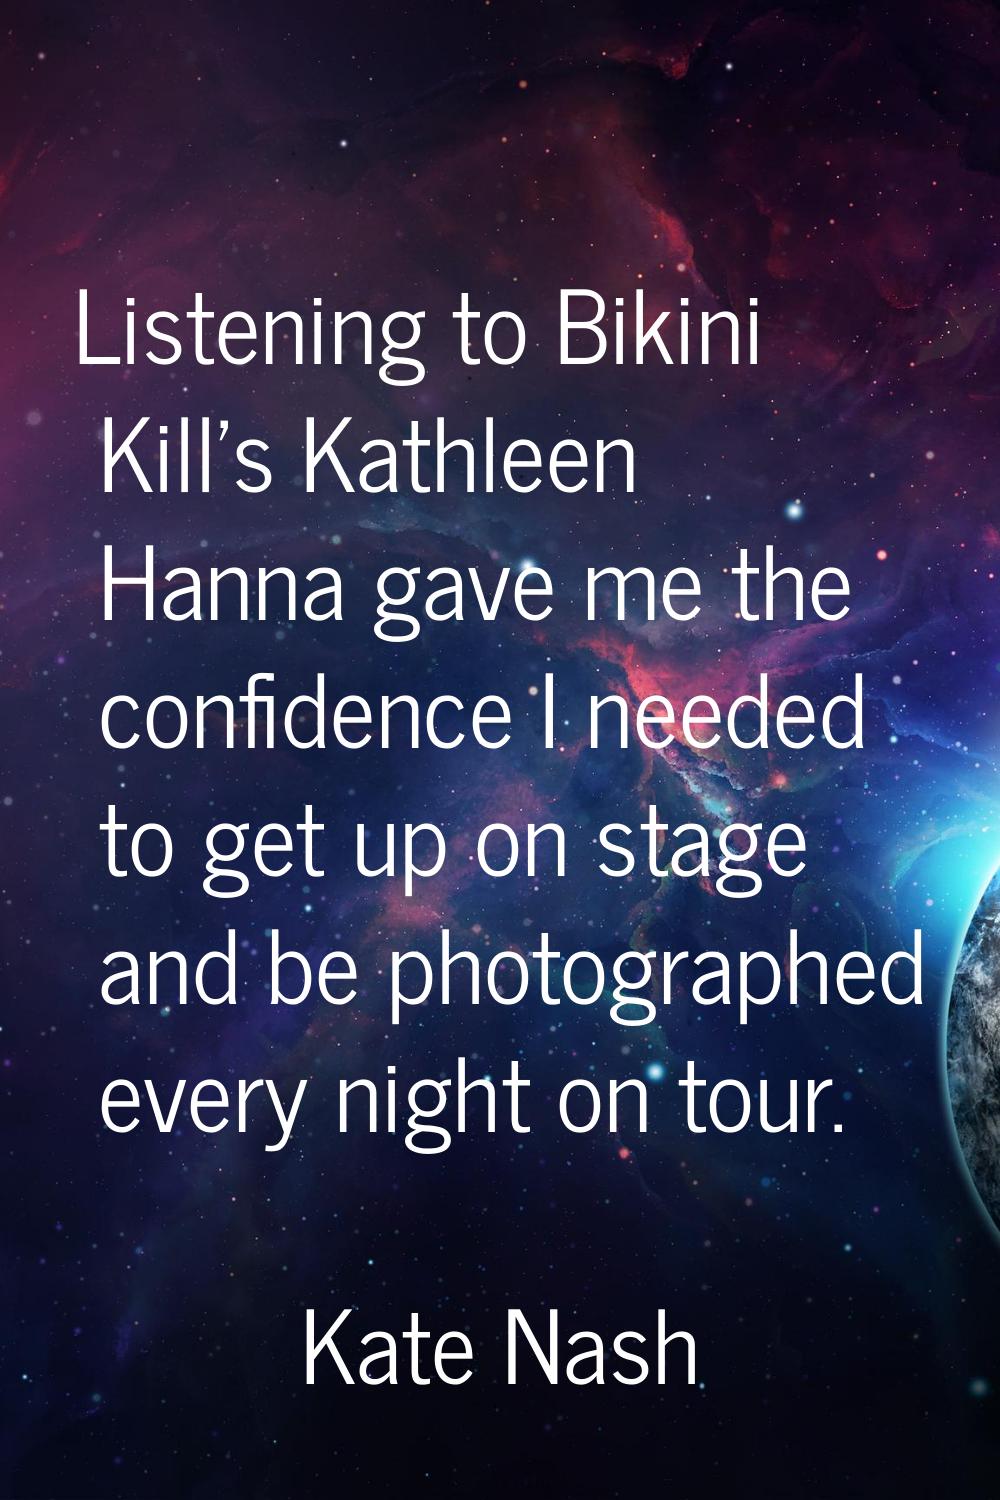 Listening to Bikini Kill's Kathleen Hanna gave me the confidence I needed to get up on stage and be